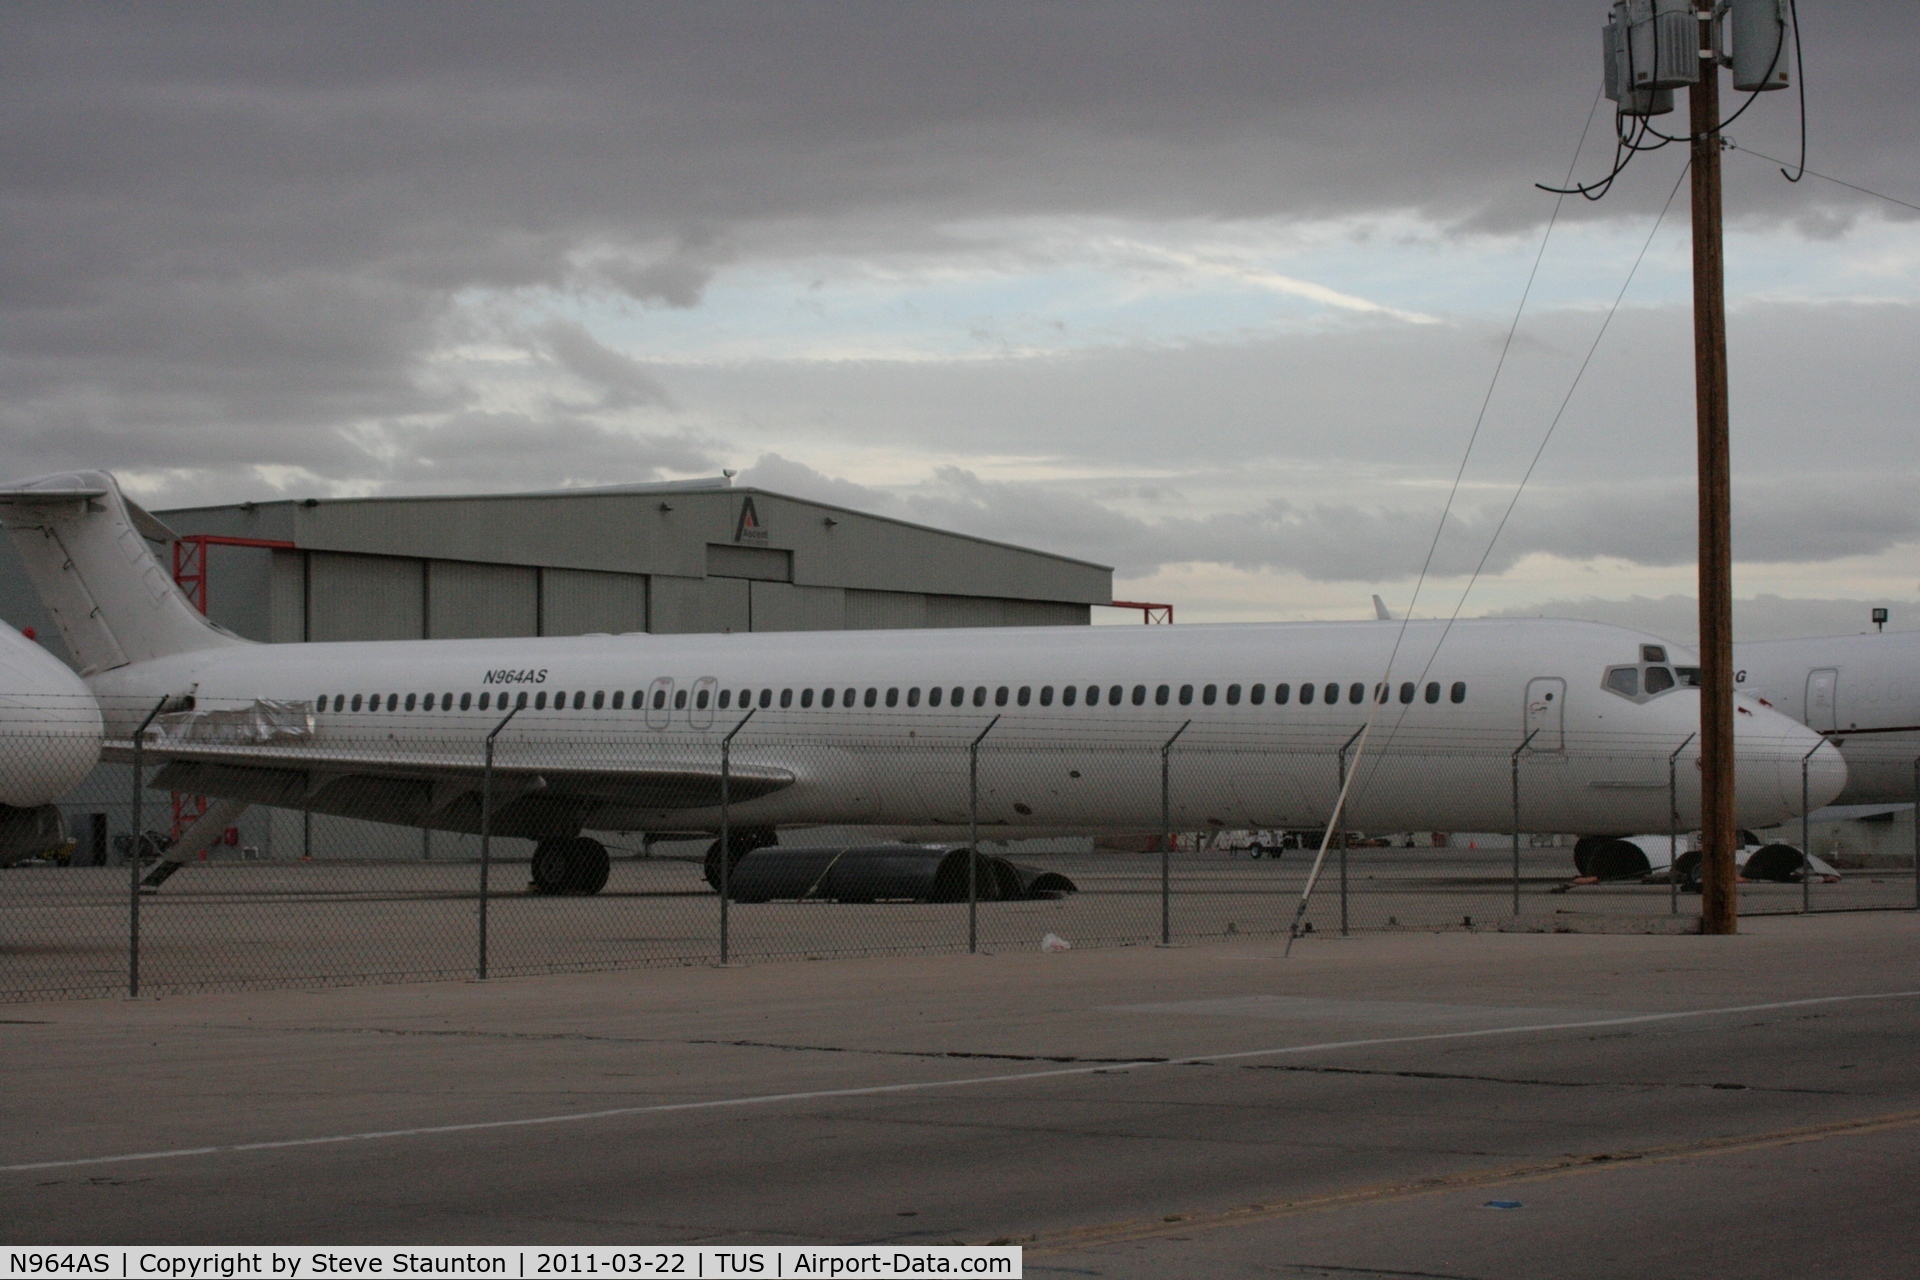 N964AS, 1992 McDonnell Douglas MD-83 (DC-9-83) C/N 53078, Taken at Tucson International Airport, in March 2011 whilst on an Aeroprint Aviation tour